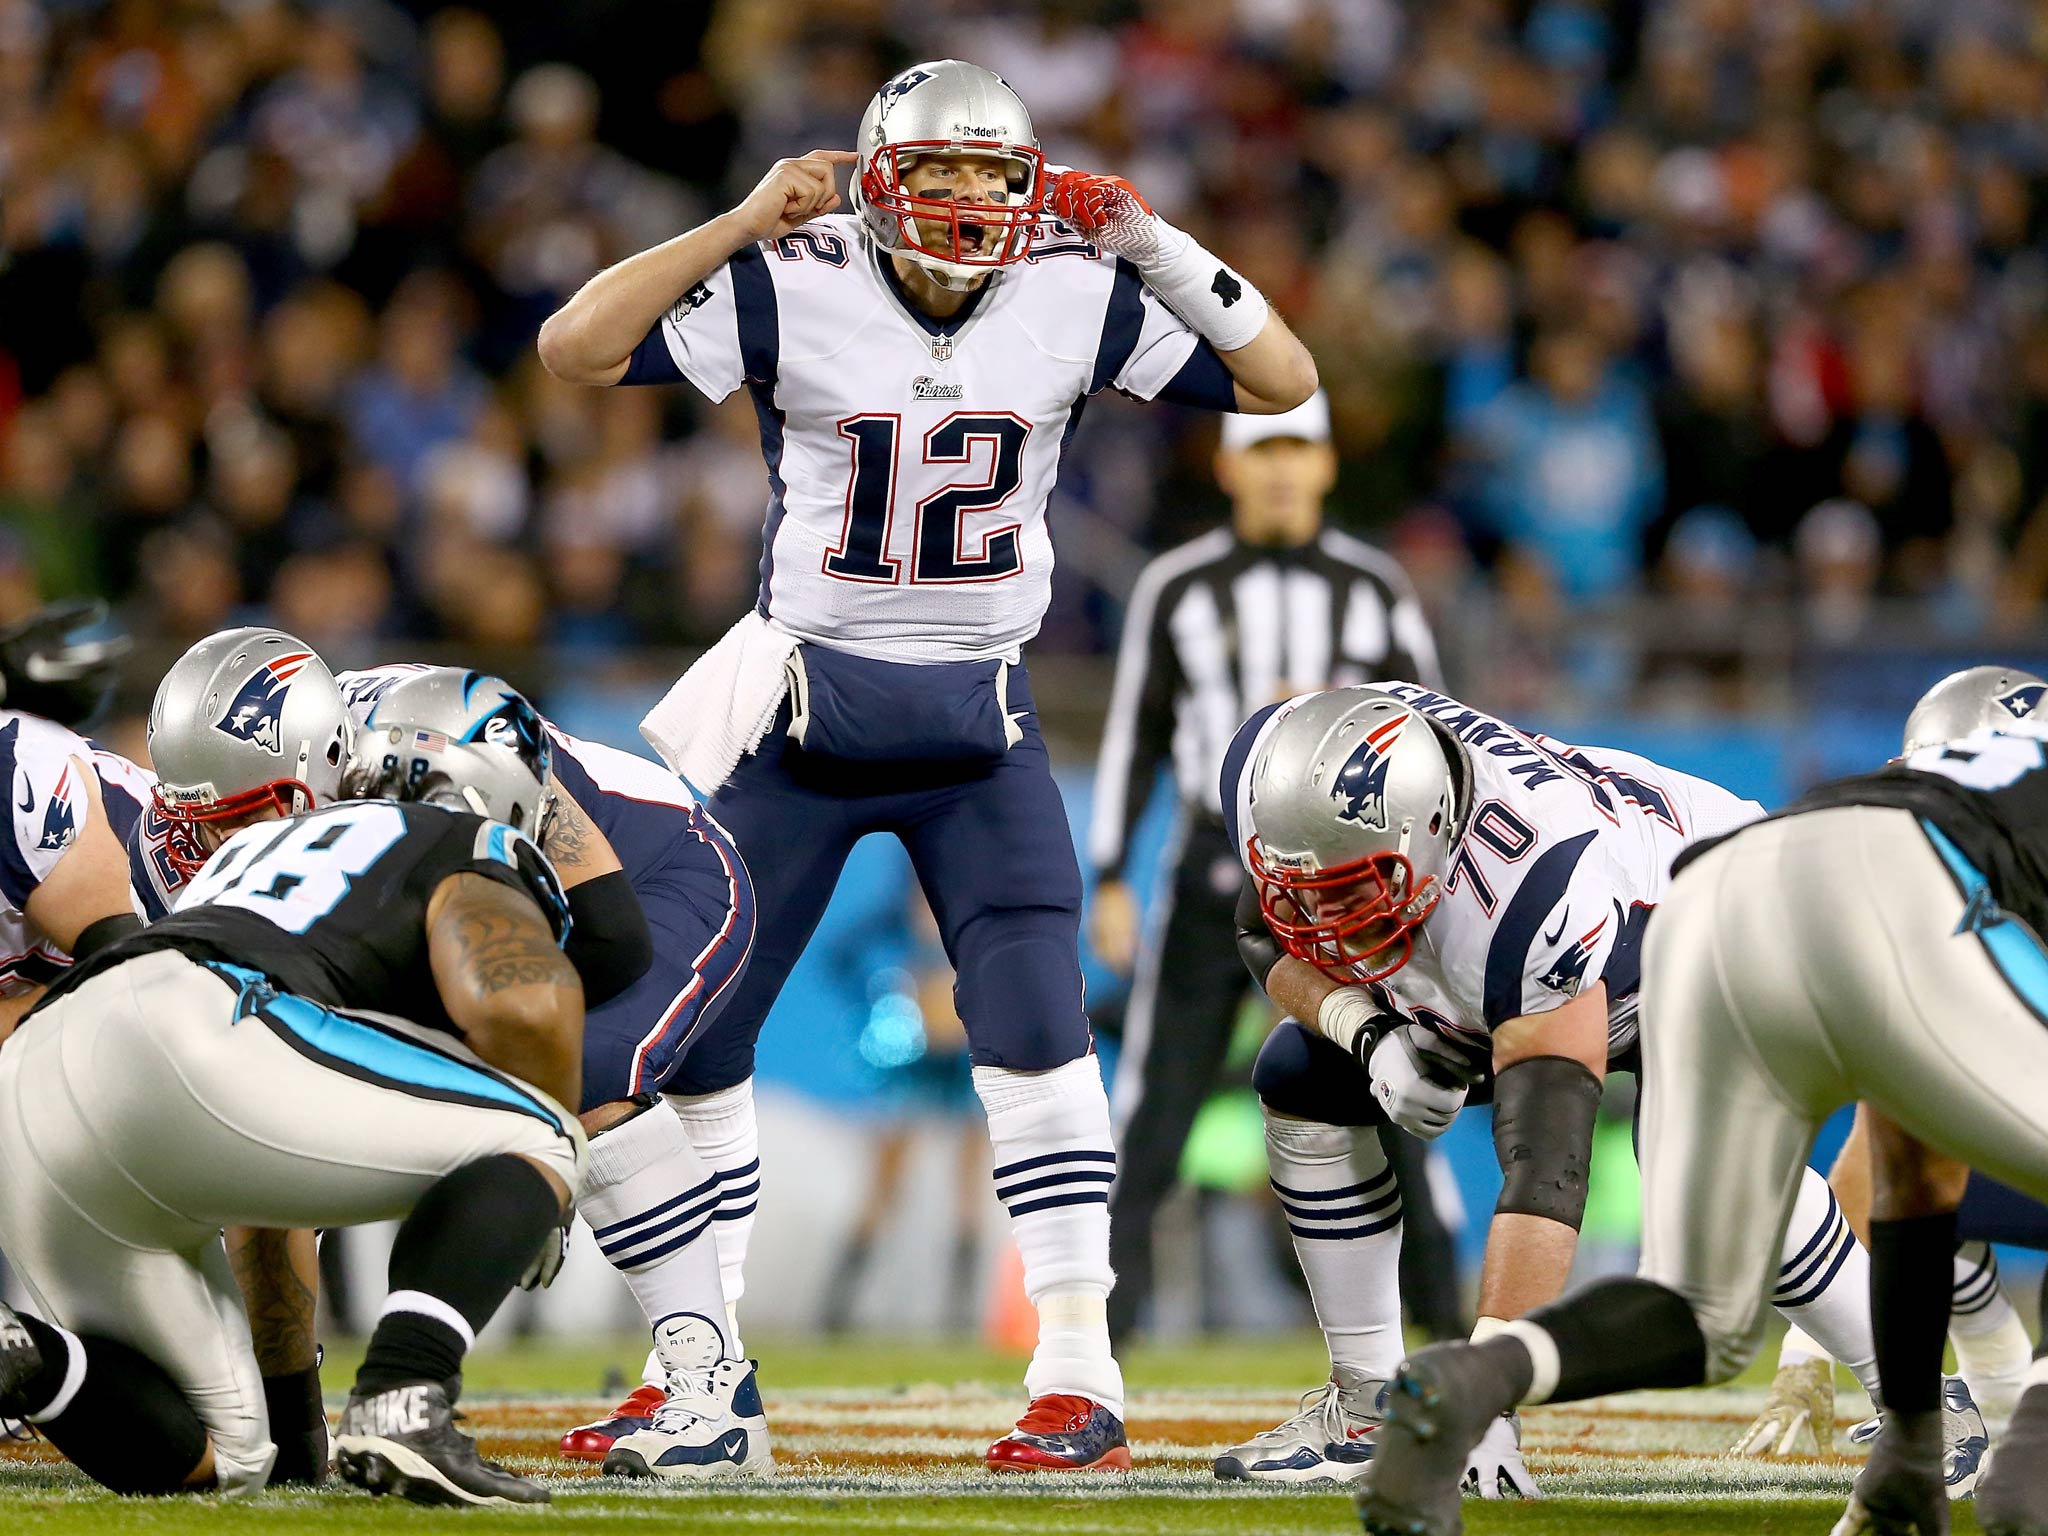 Tom Brady of the Patriots was furious after the defeat to the Panthers